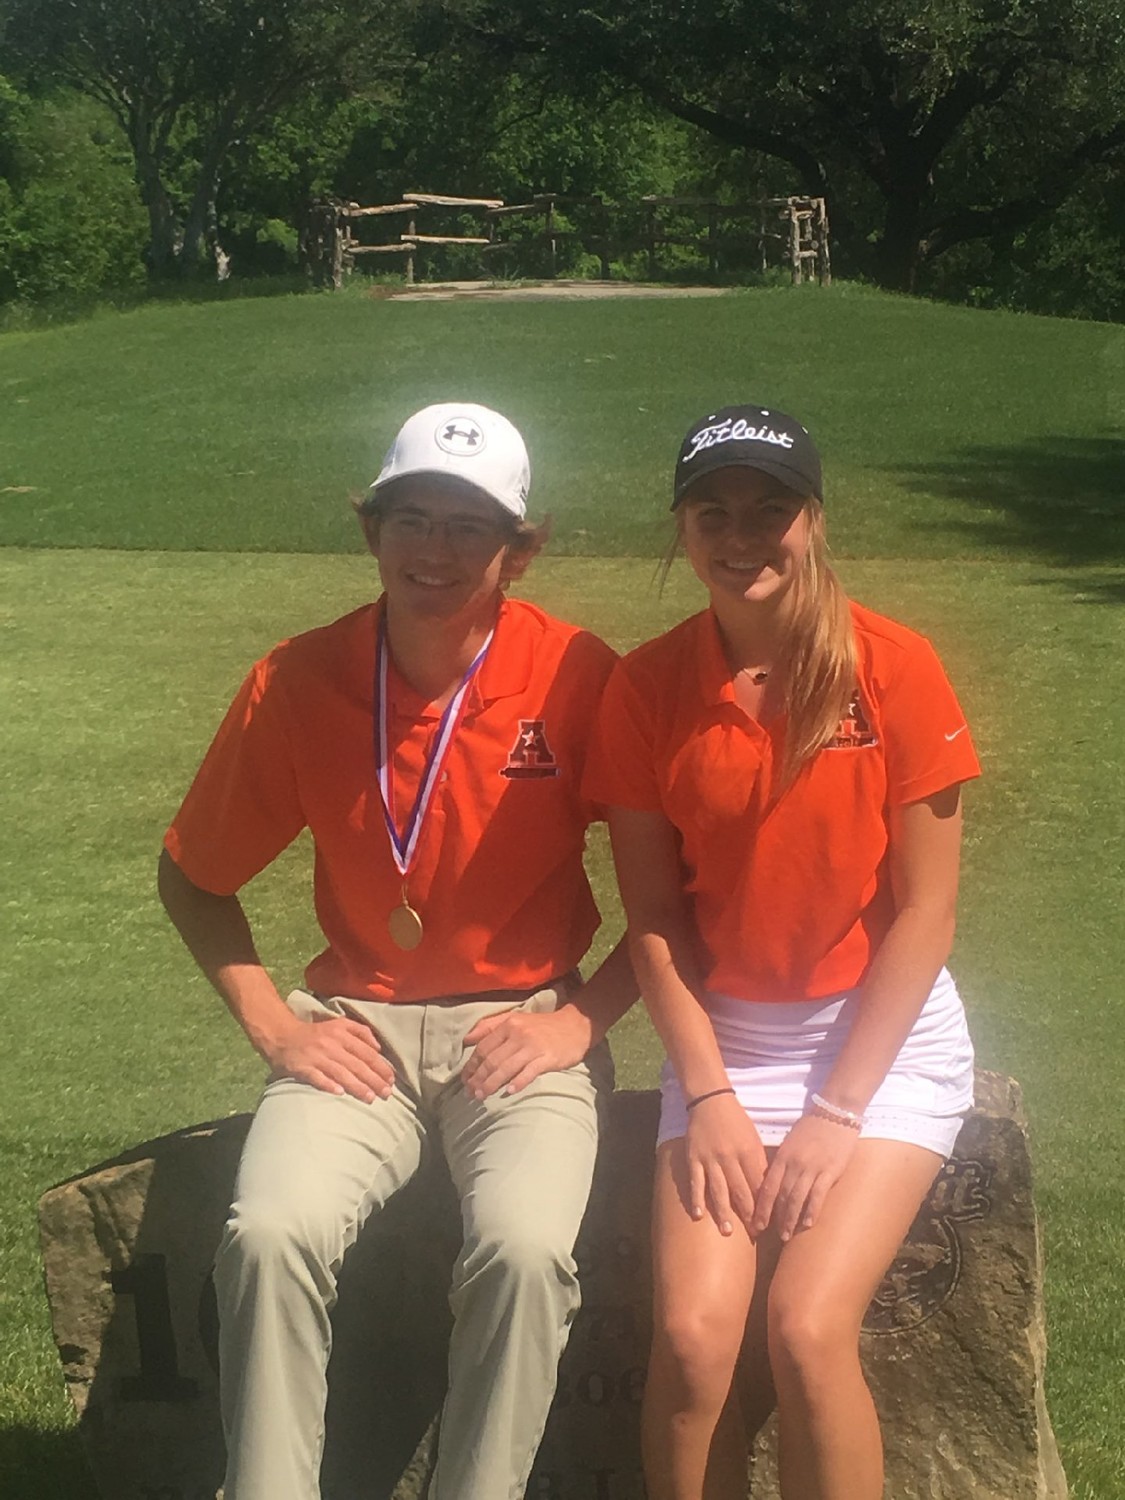 Sophomores Mason Richter and Kiley Allen advanced to the regional meet after placing first as district individual medalists for their respective sides. Richter placed first overall, winning the district title on the boys side. Allen placed fourth overall on the girls. Both golfers travel to Corpus Christi for the Region IV-4A meet from April 23-24.